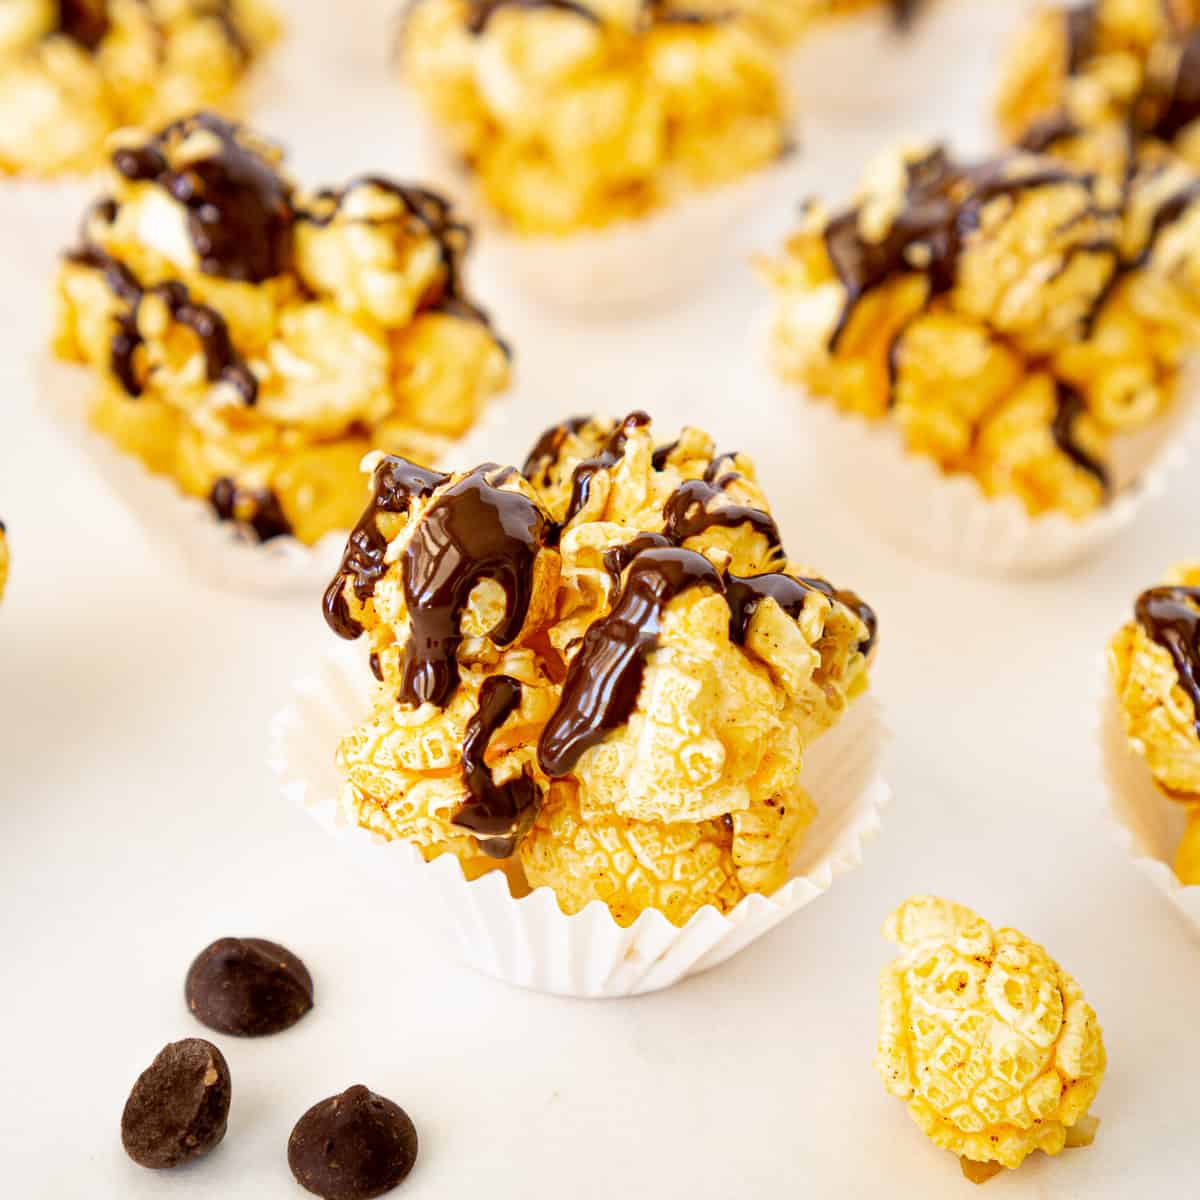 close up of chocolate popcorn ball in a muffin liner with chocolate chips on the side